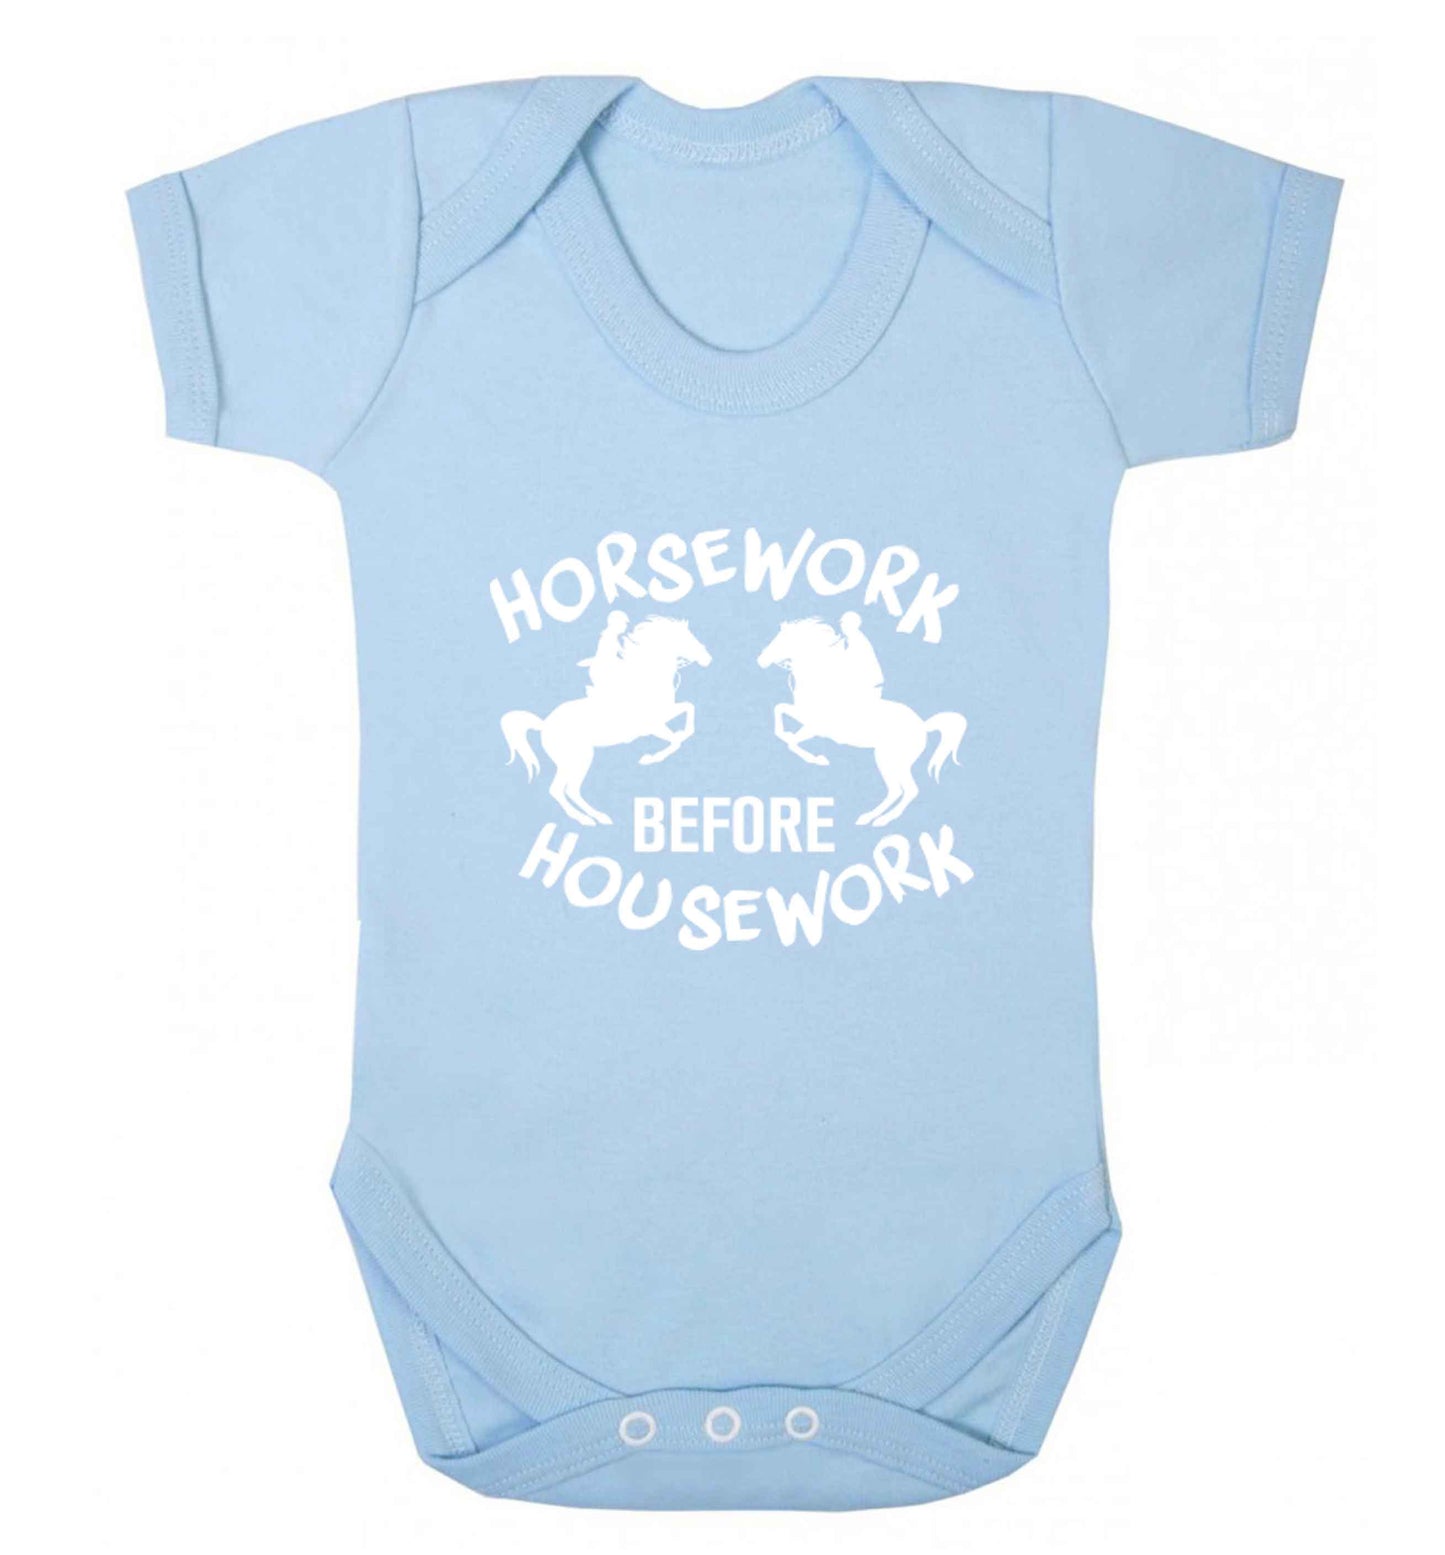 Horsework before housework baby vest pale blue 18-24 months